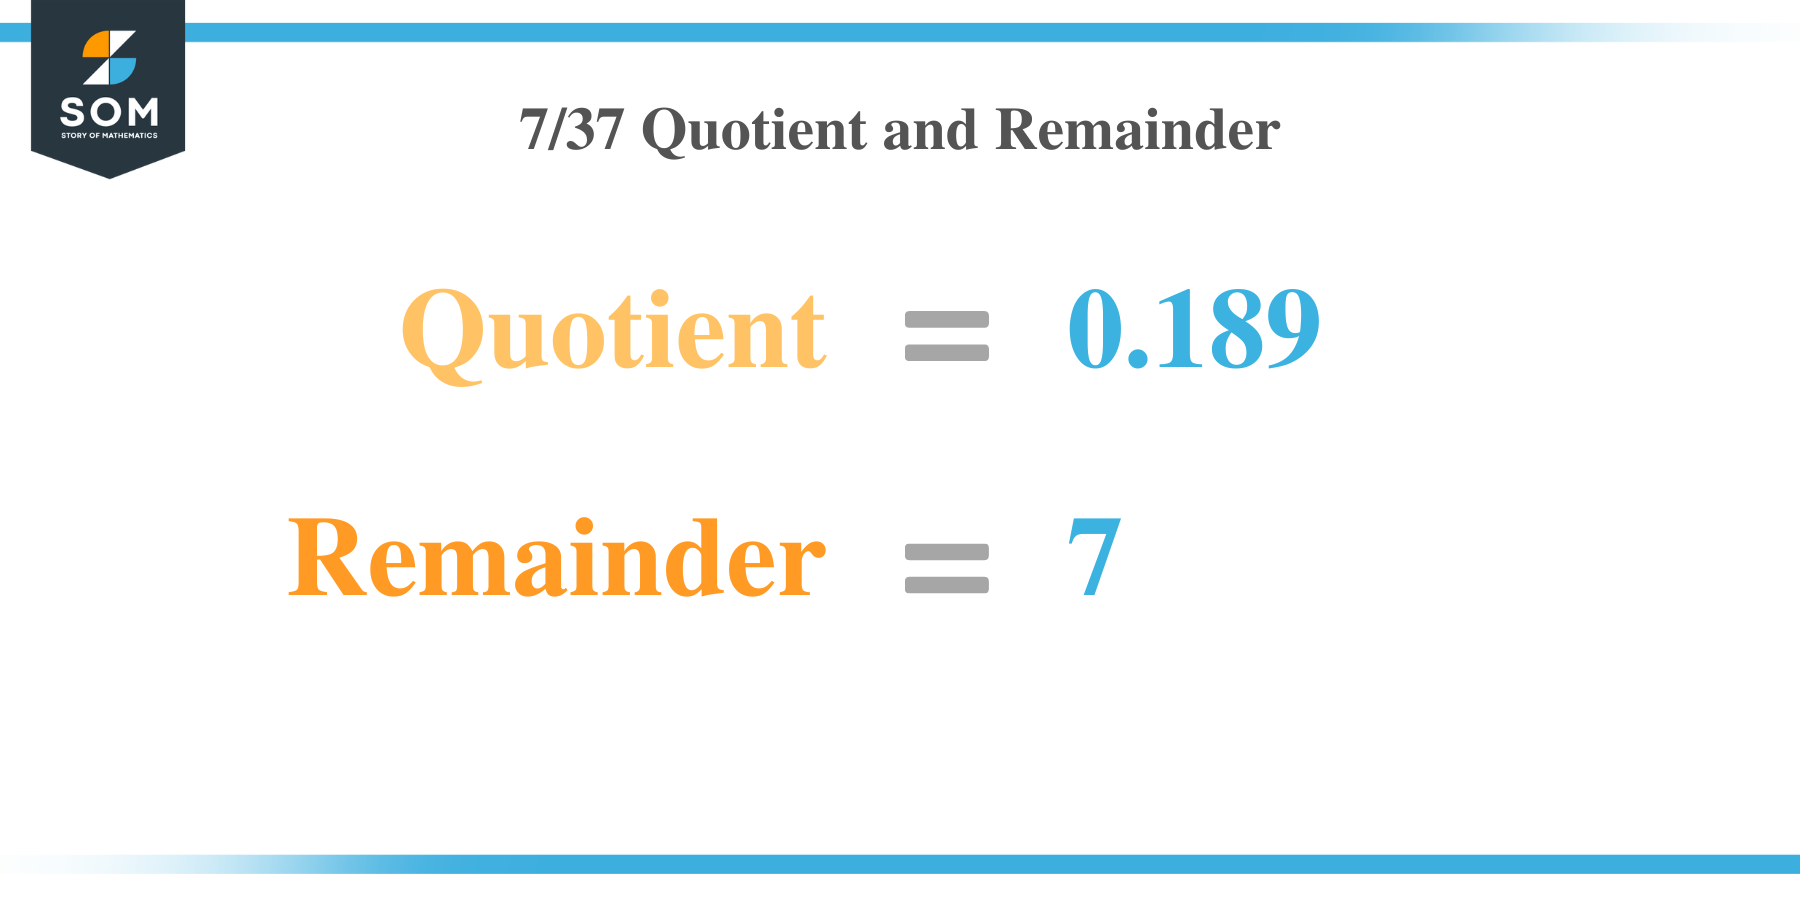 7 by 37 Quotient and Remainder